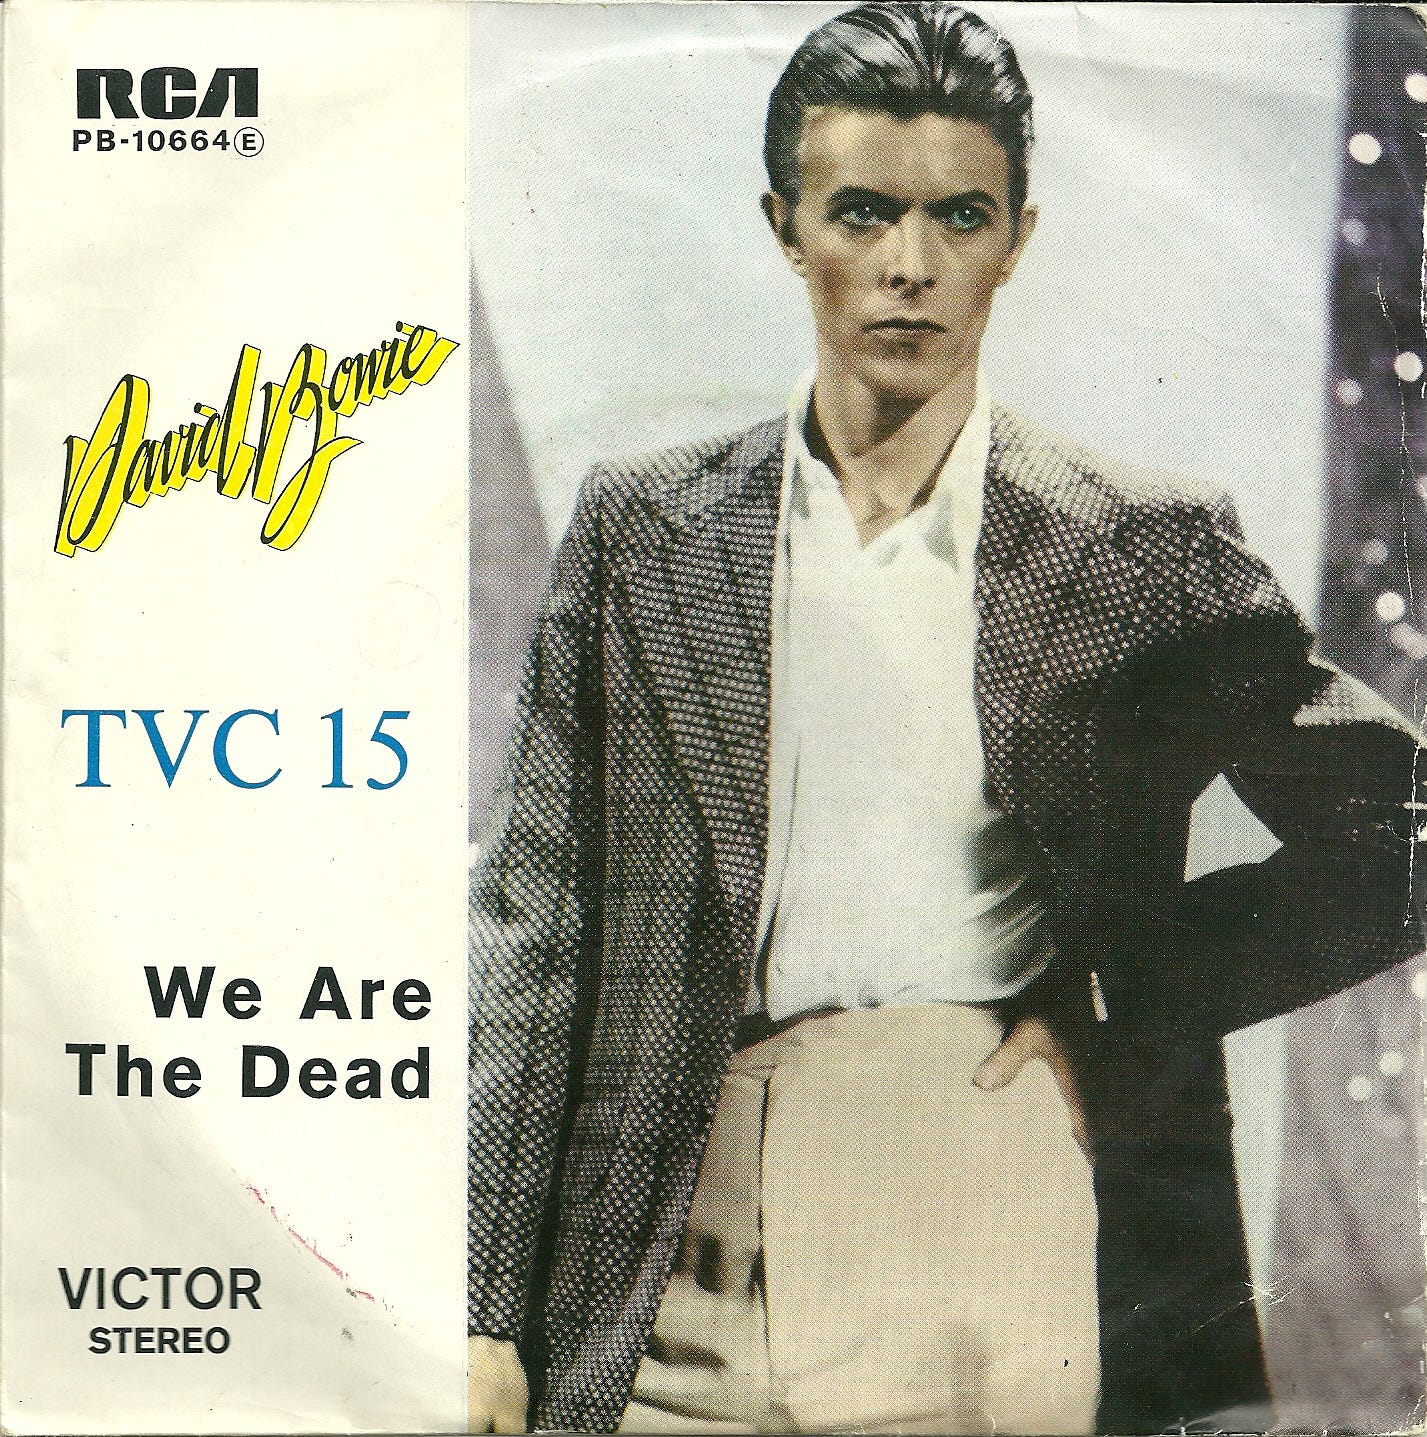 David Bowie Vinyl Collection: TVC 15 / WE ARE THE DEAD - RCA PB 10664 ...